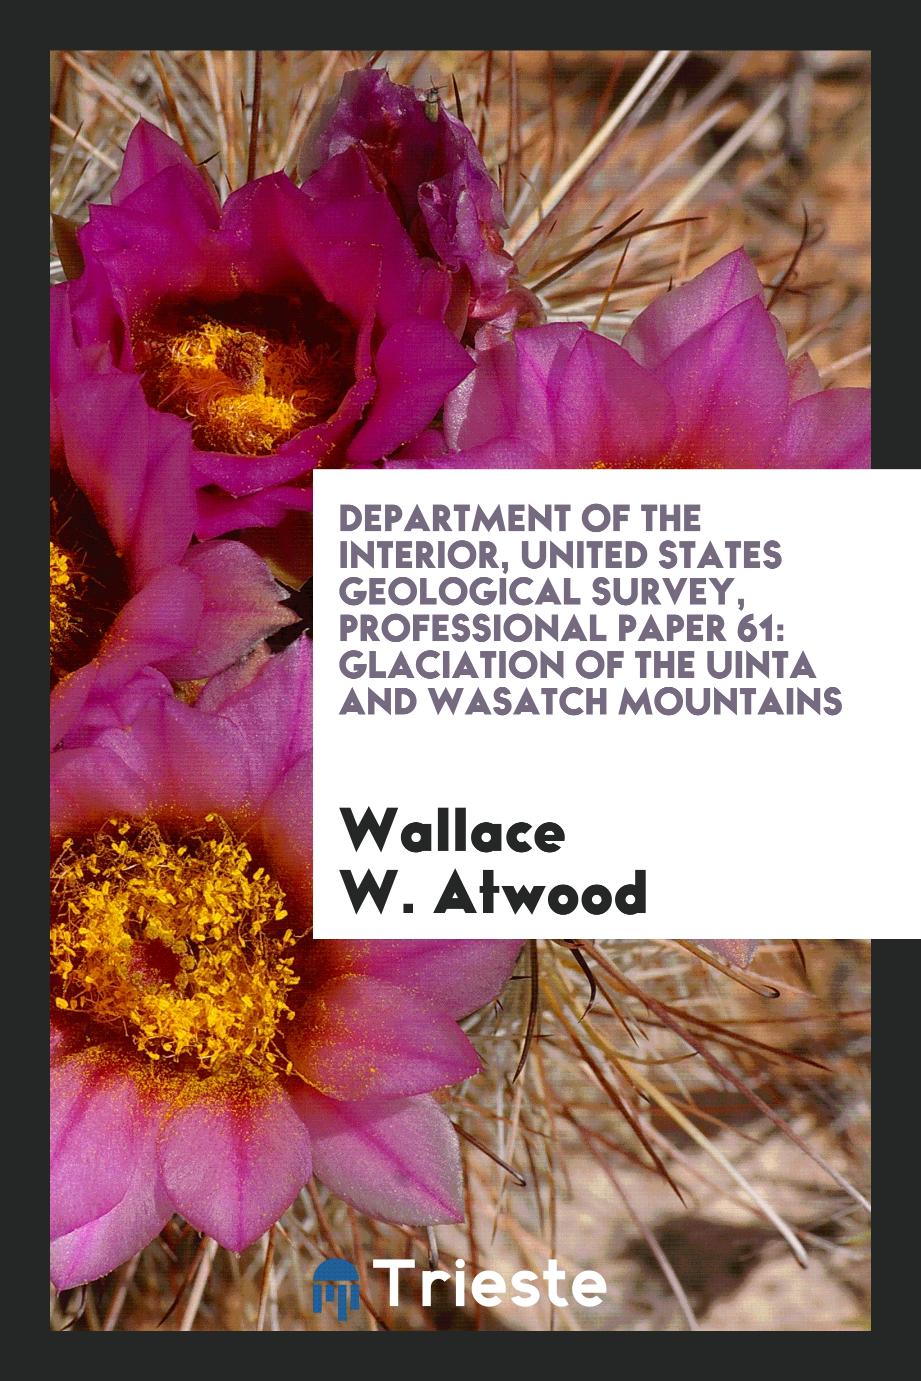 Department of the Interior, United States Geological Survey, Professional Paper 61: Glaciation of the Uinta and Wasatch Mountains